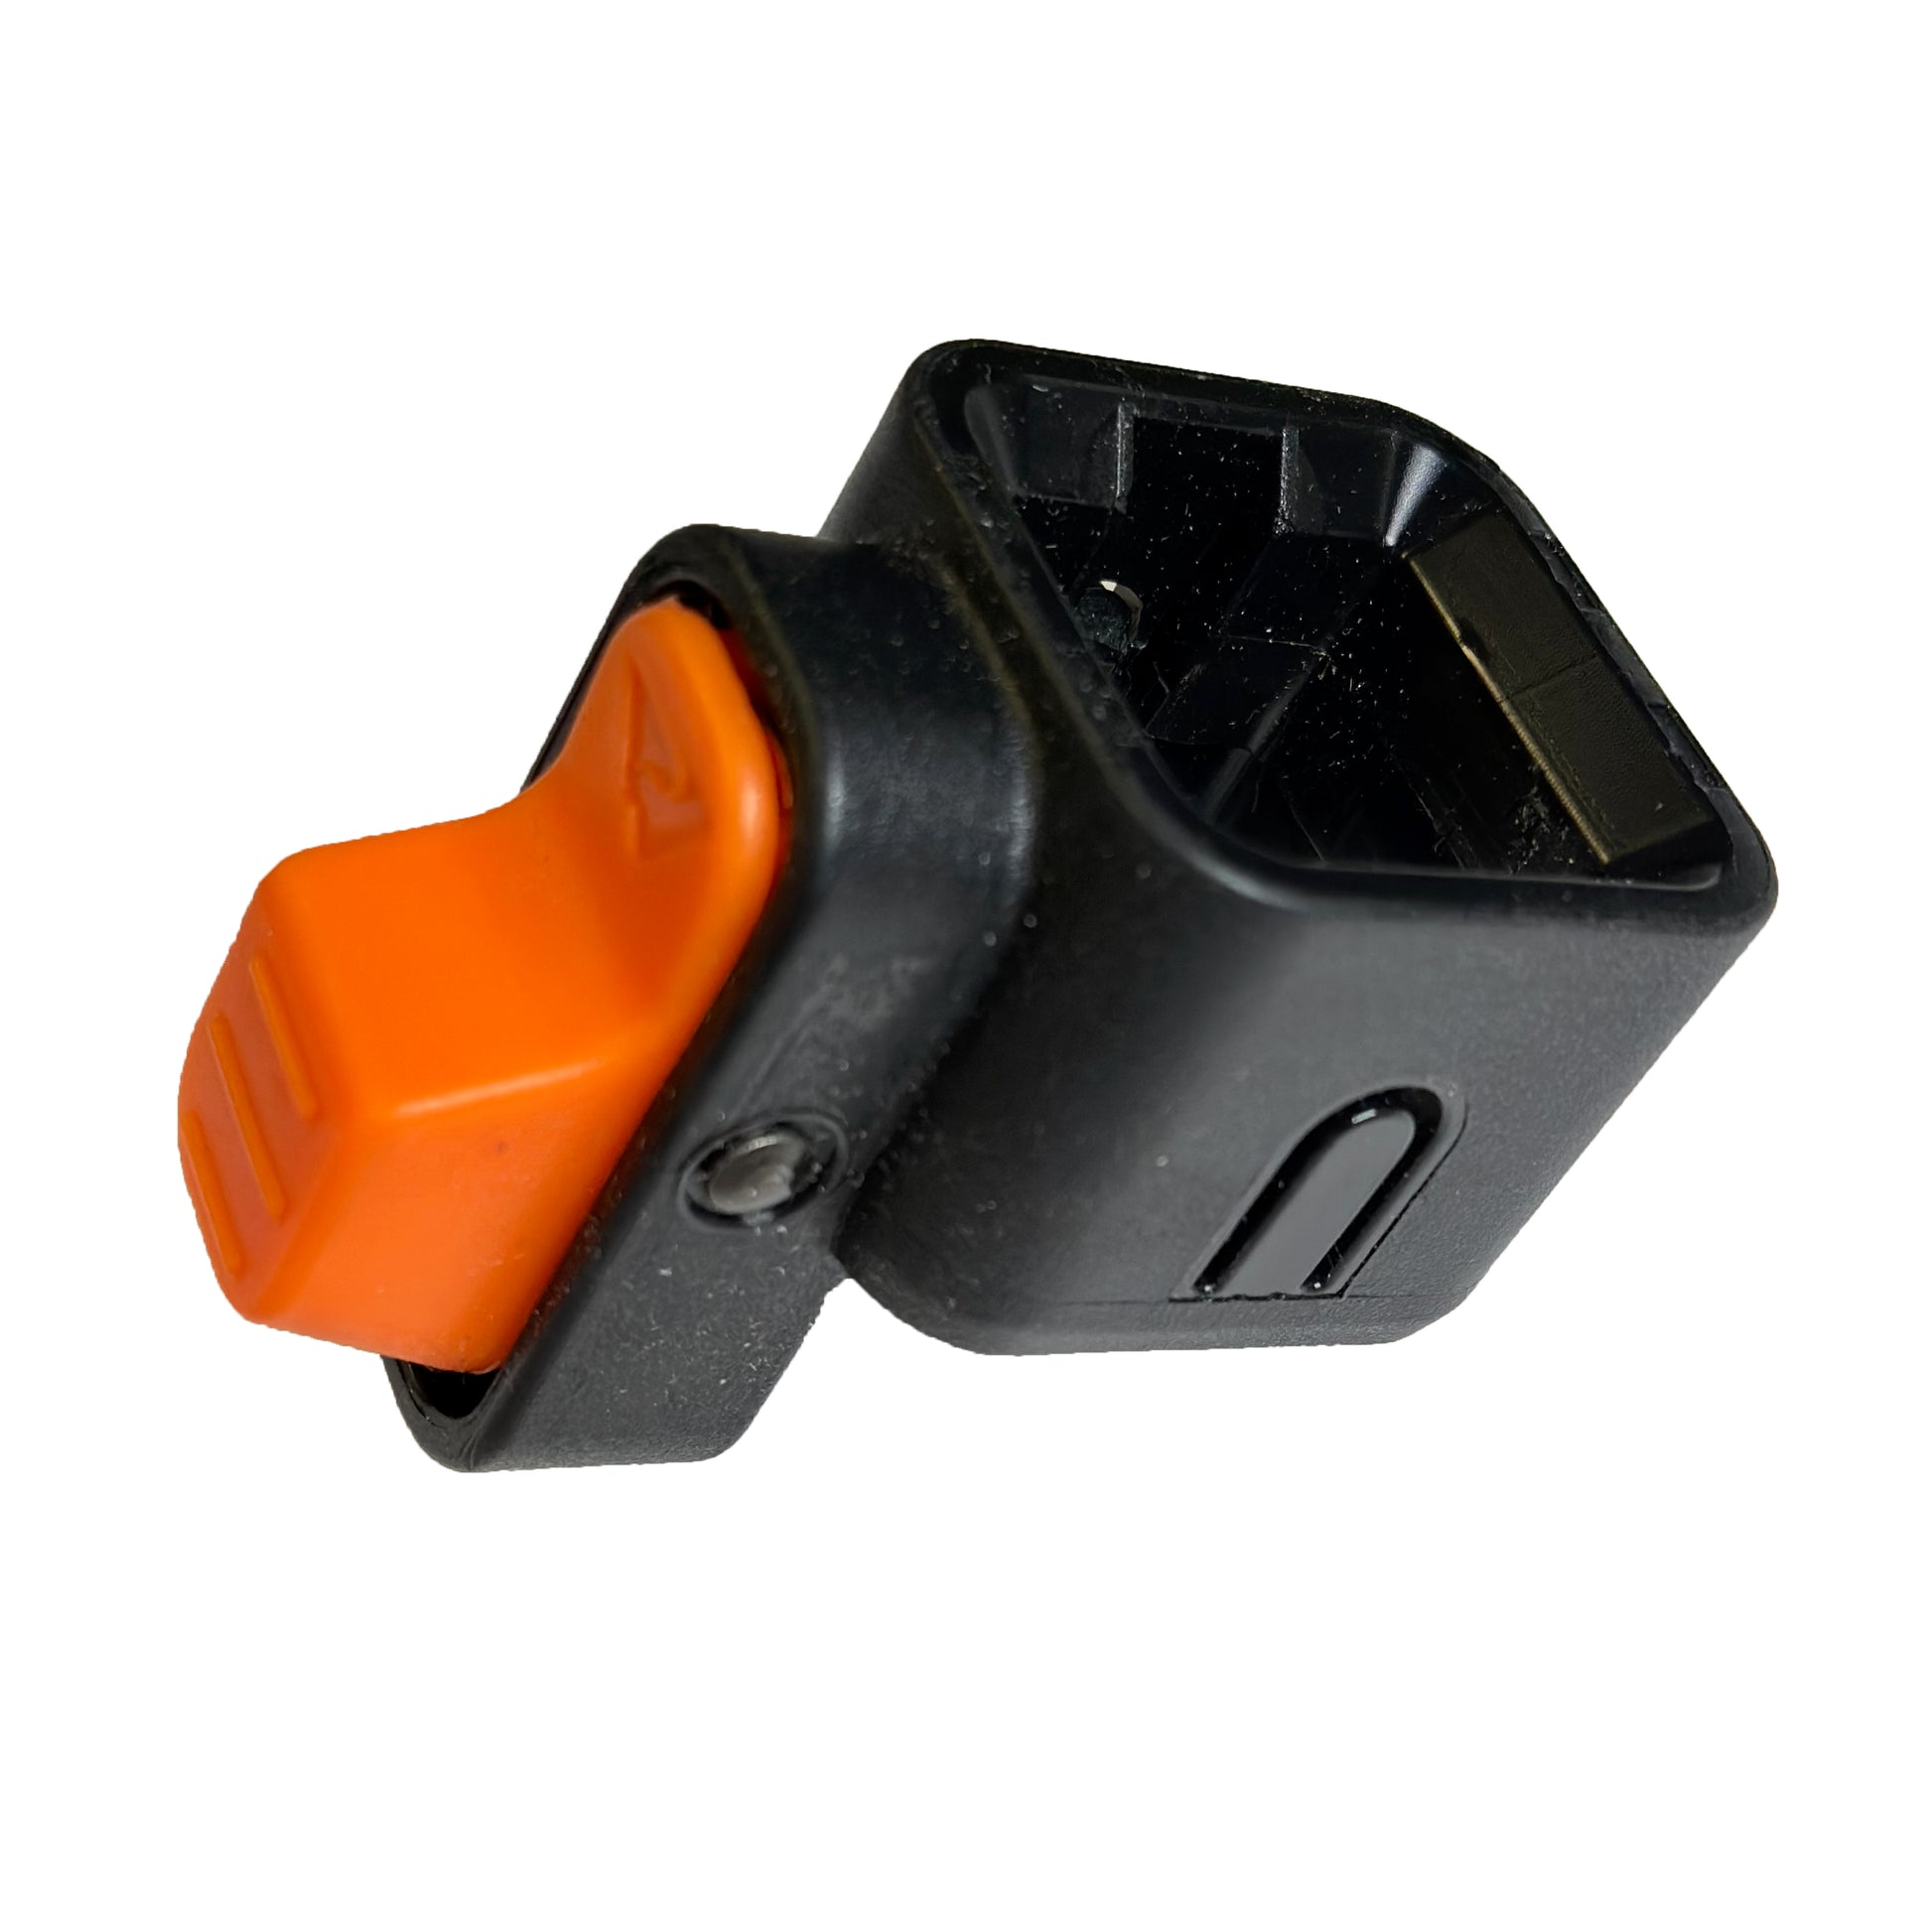 Angled view of a black leg lower slider with an orange release button, part of an Ozark Trail canopy's leg adjustment mechanism.